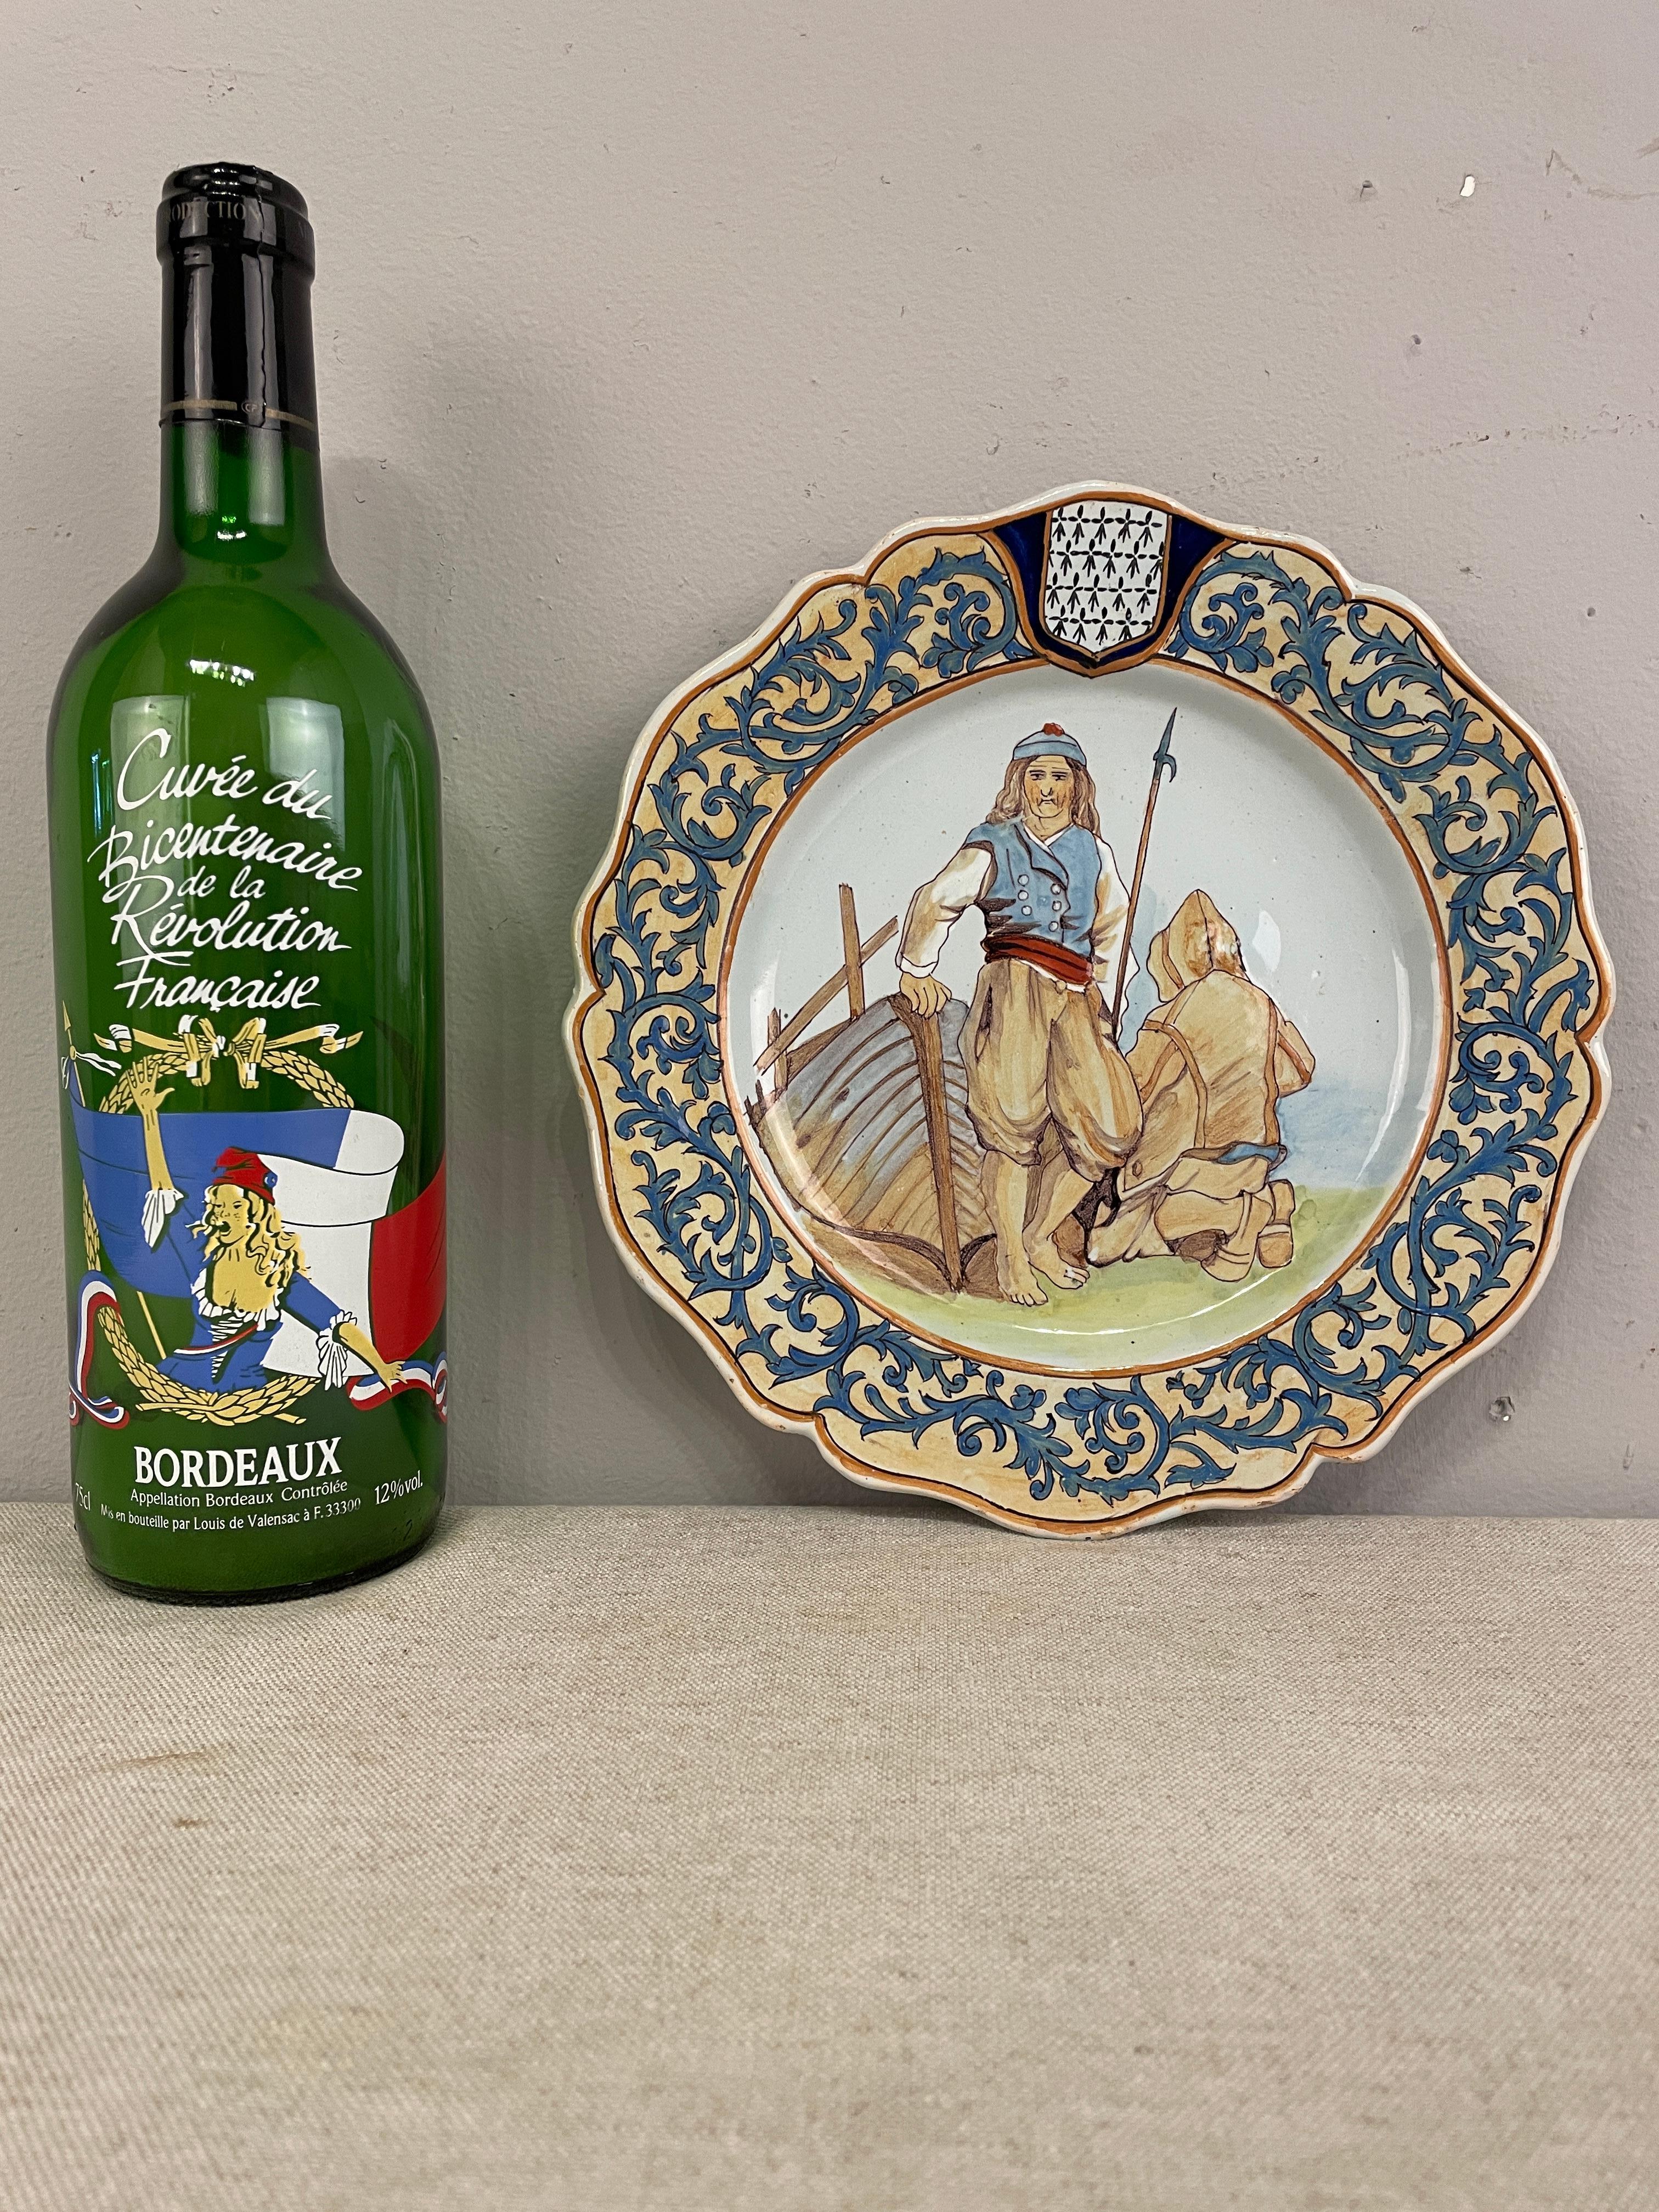 A good 1950's French Quimper Faience plate depicting two fishermen, with soft color. In good condition with minor wear.
9.25